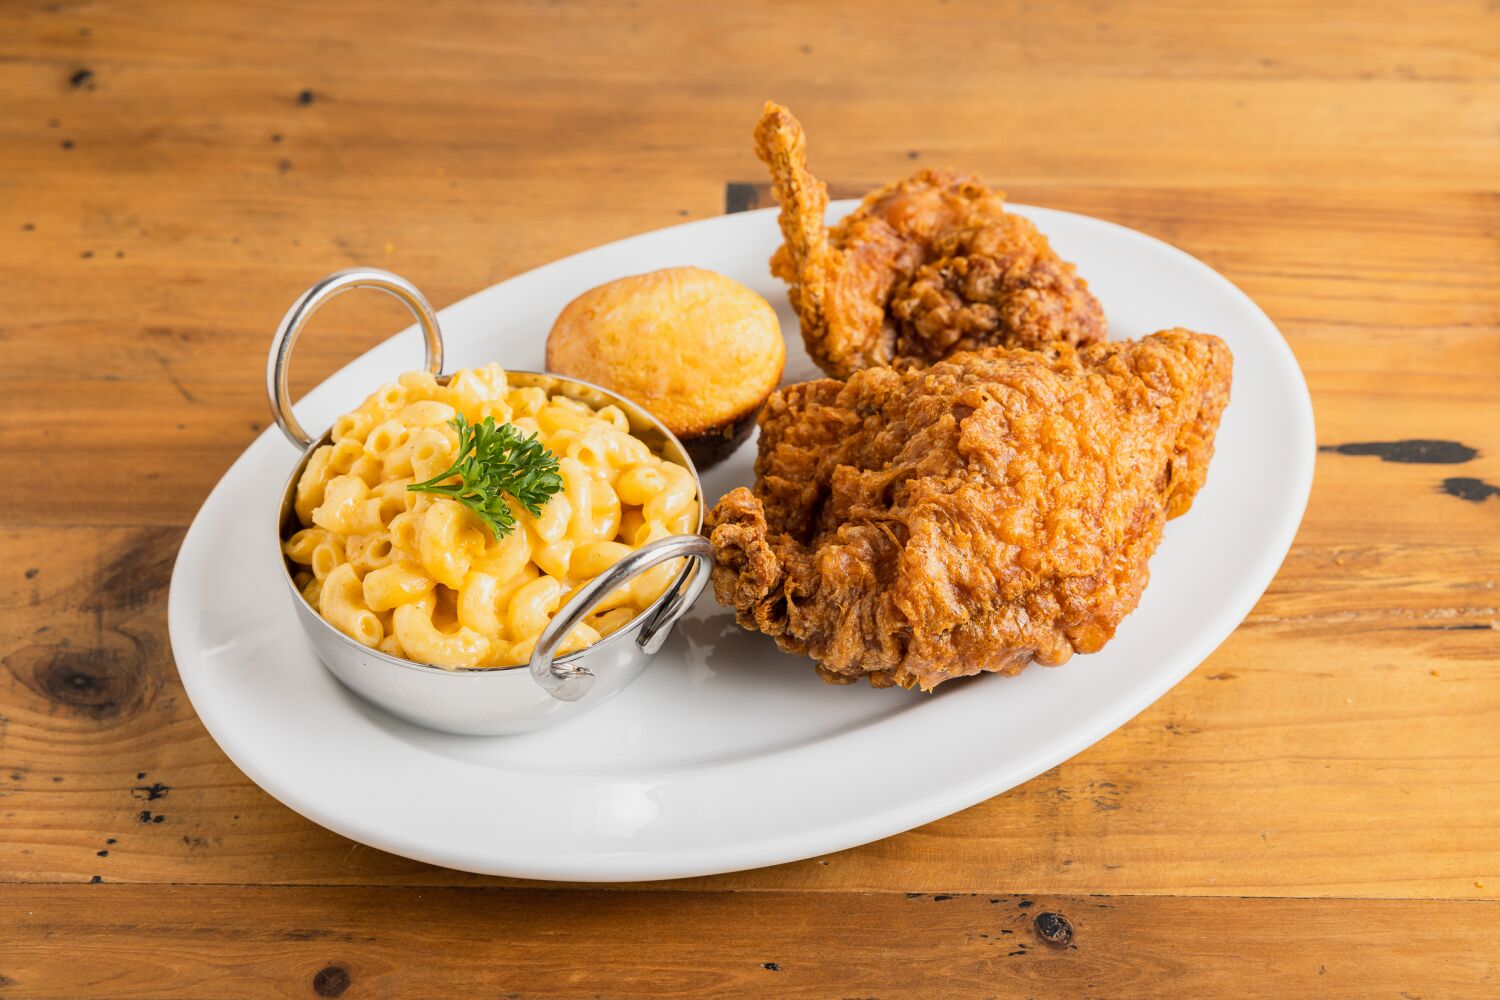 New Orleans fried chicken specialist Willie Mae's launches takeout in L.A.